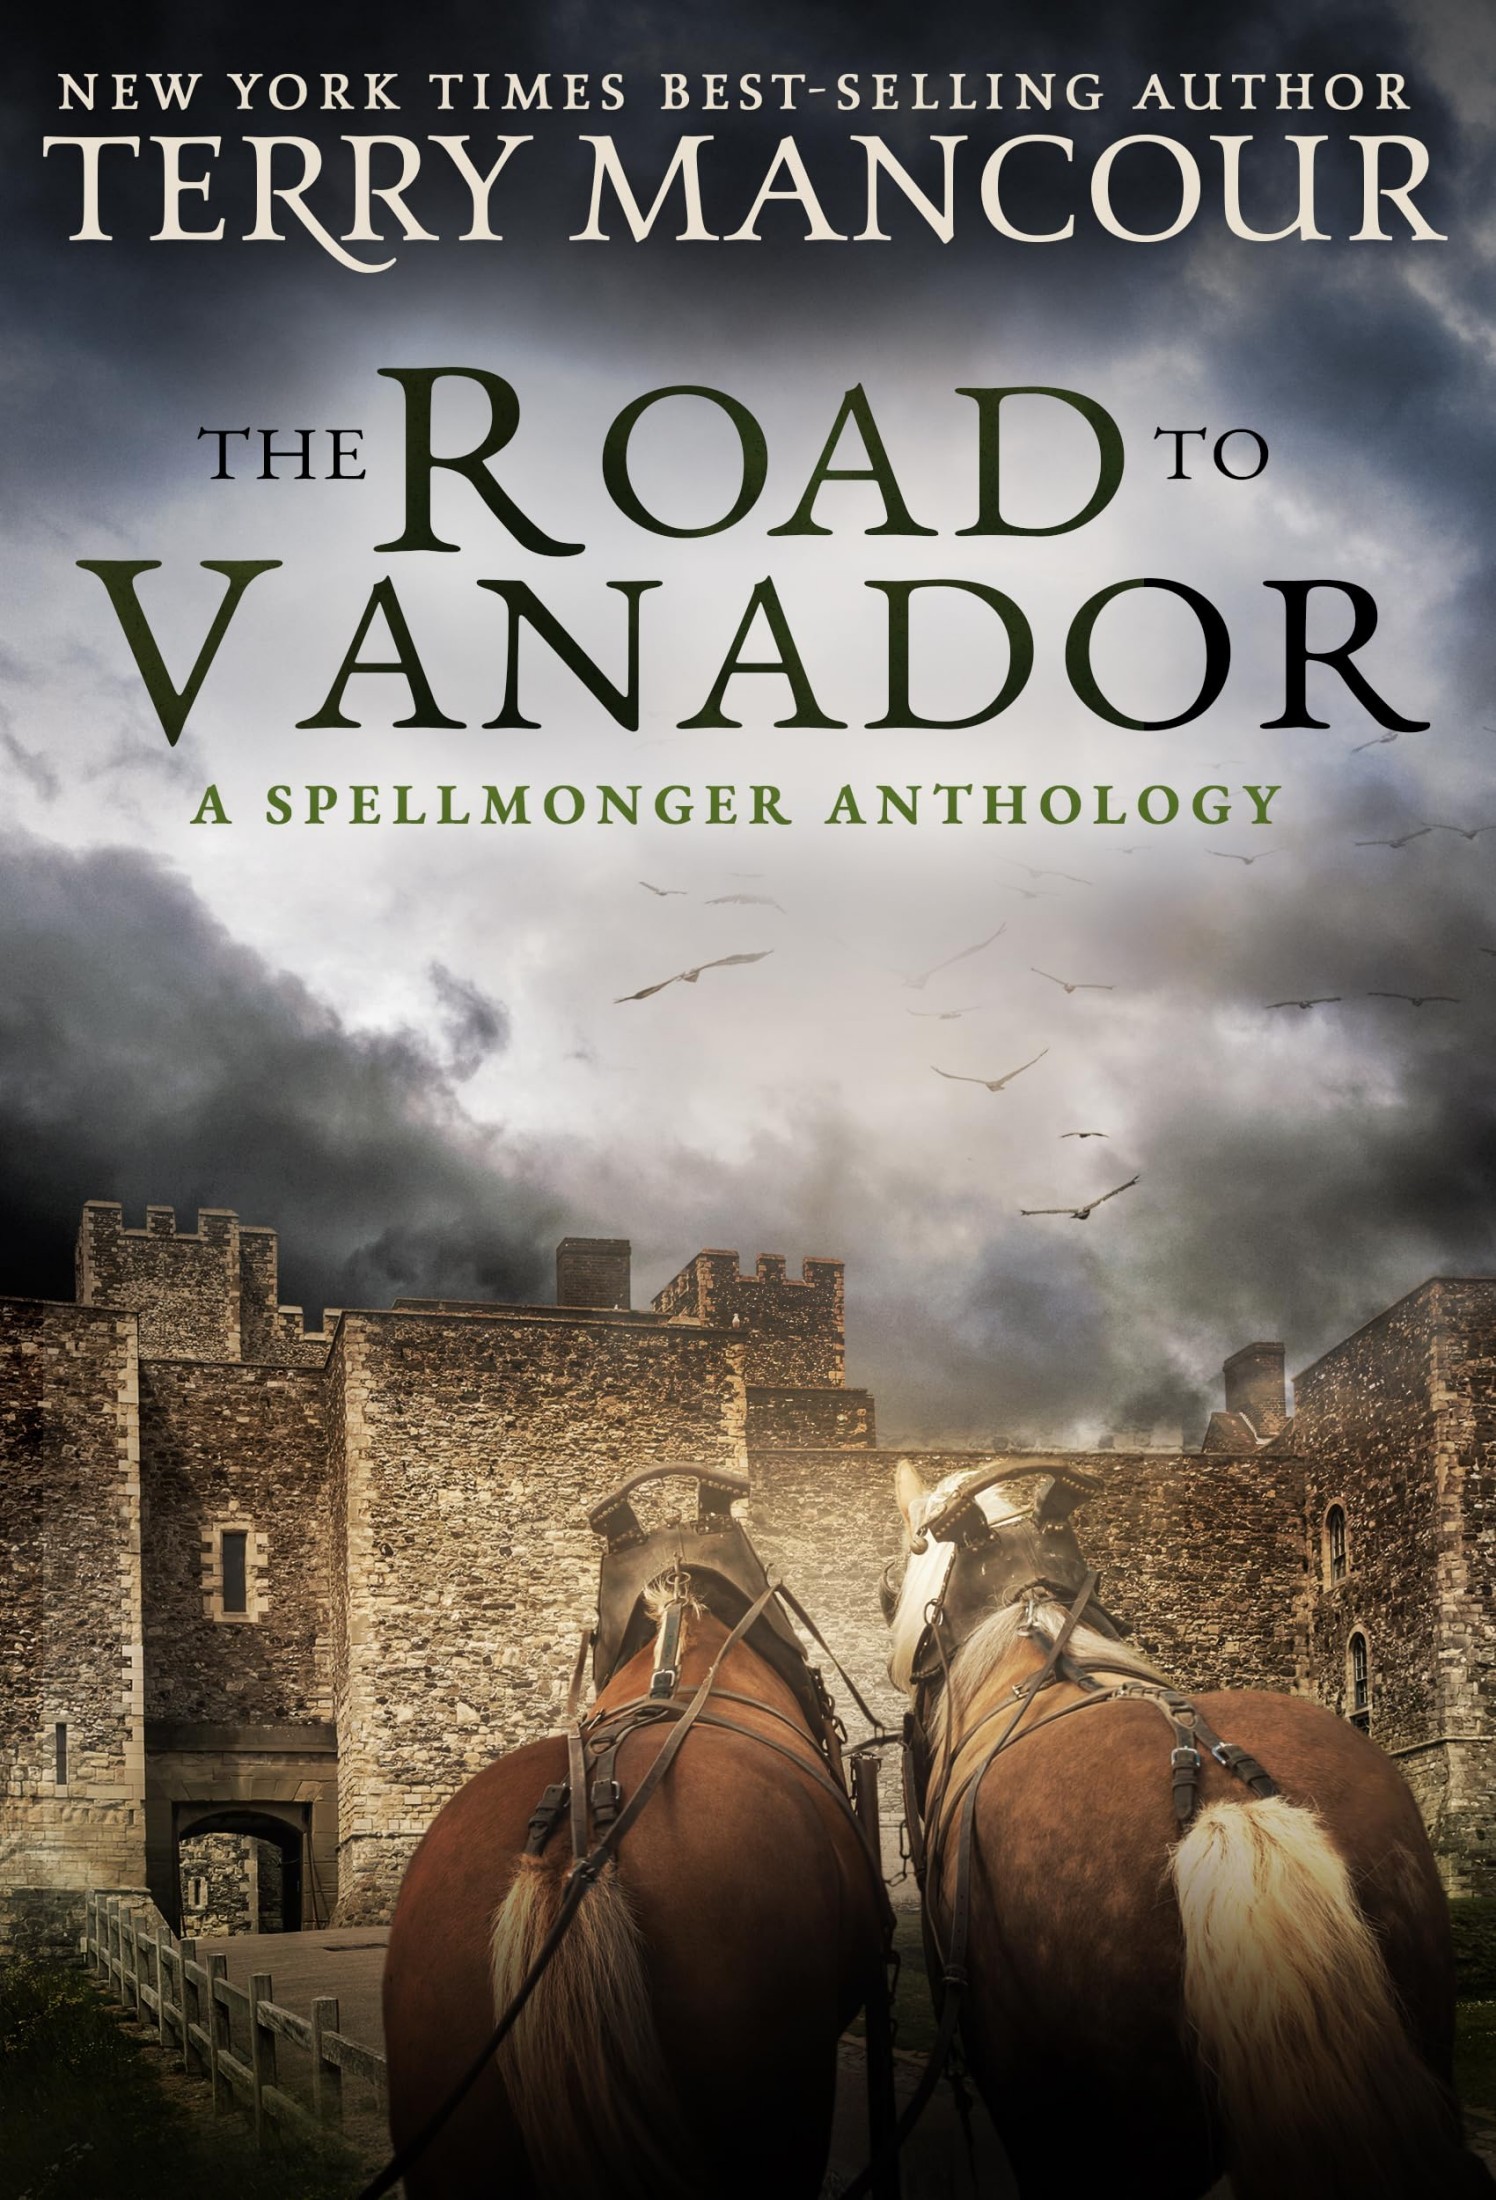 The Road to Vanador: A Travelogue